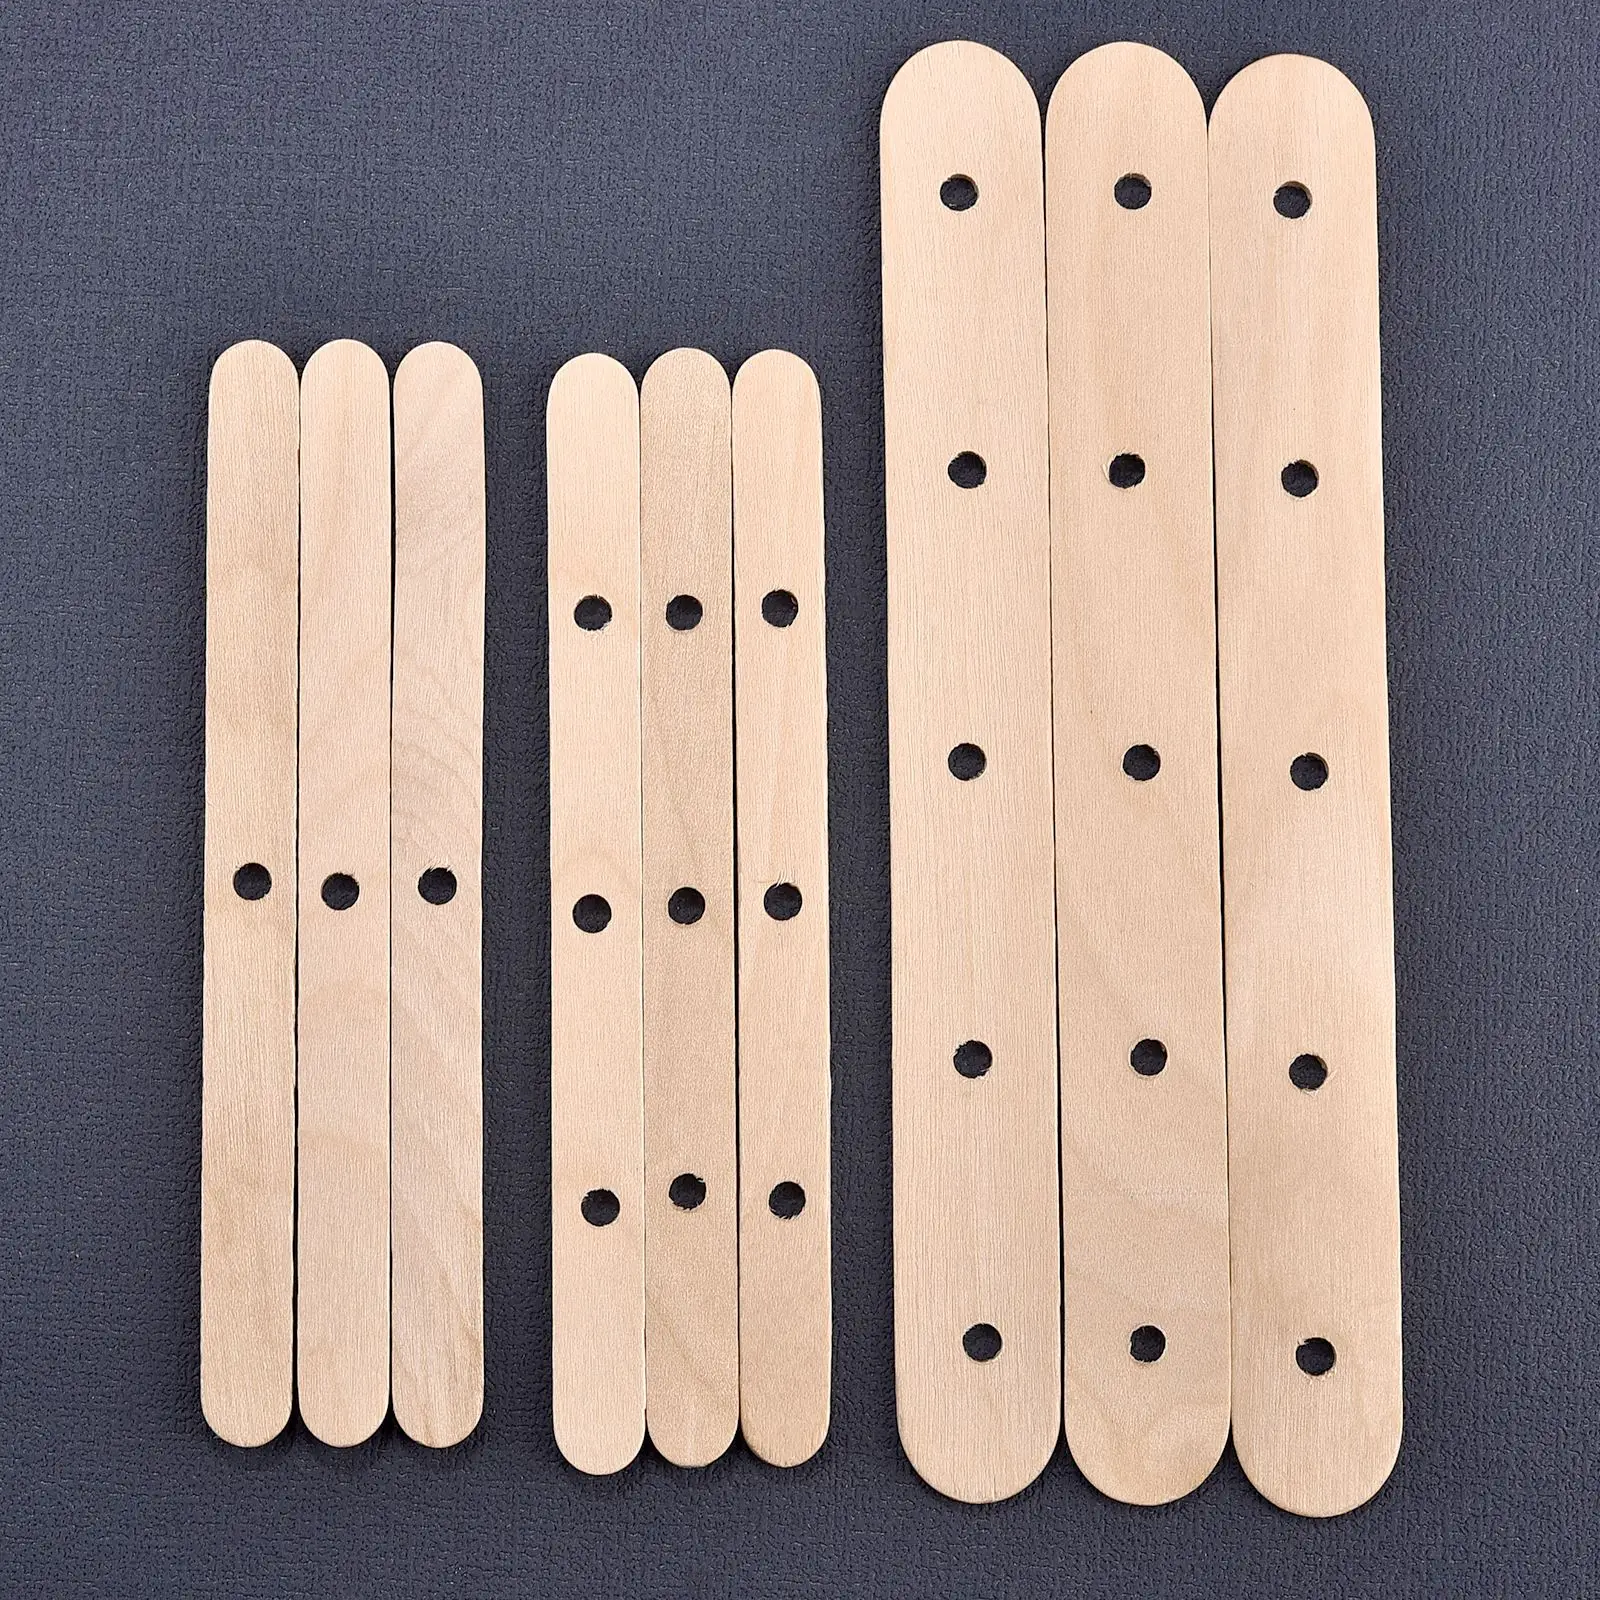 Candle DIY Craft Candle Making Supplies Tools Wooden Wax Core